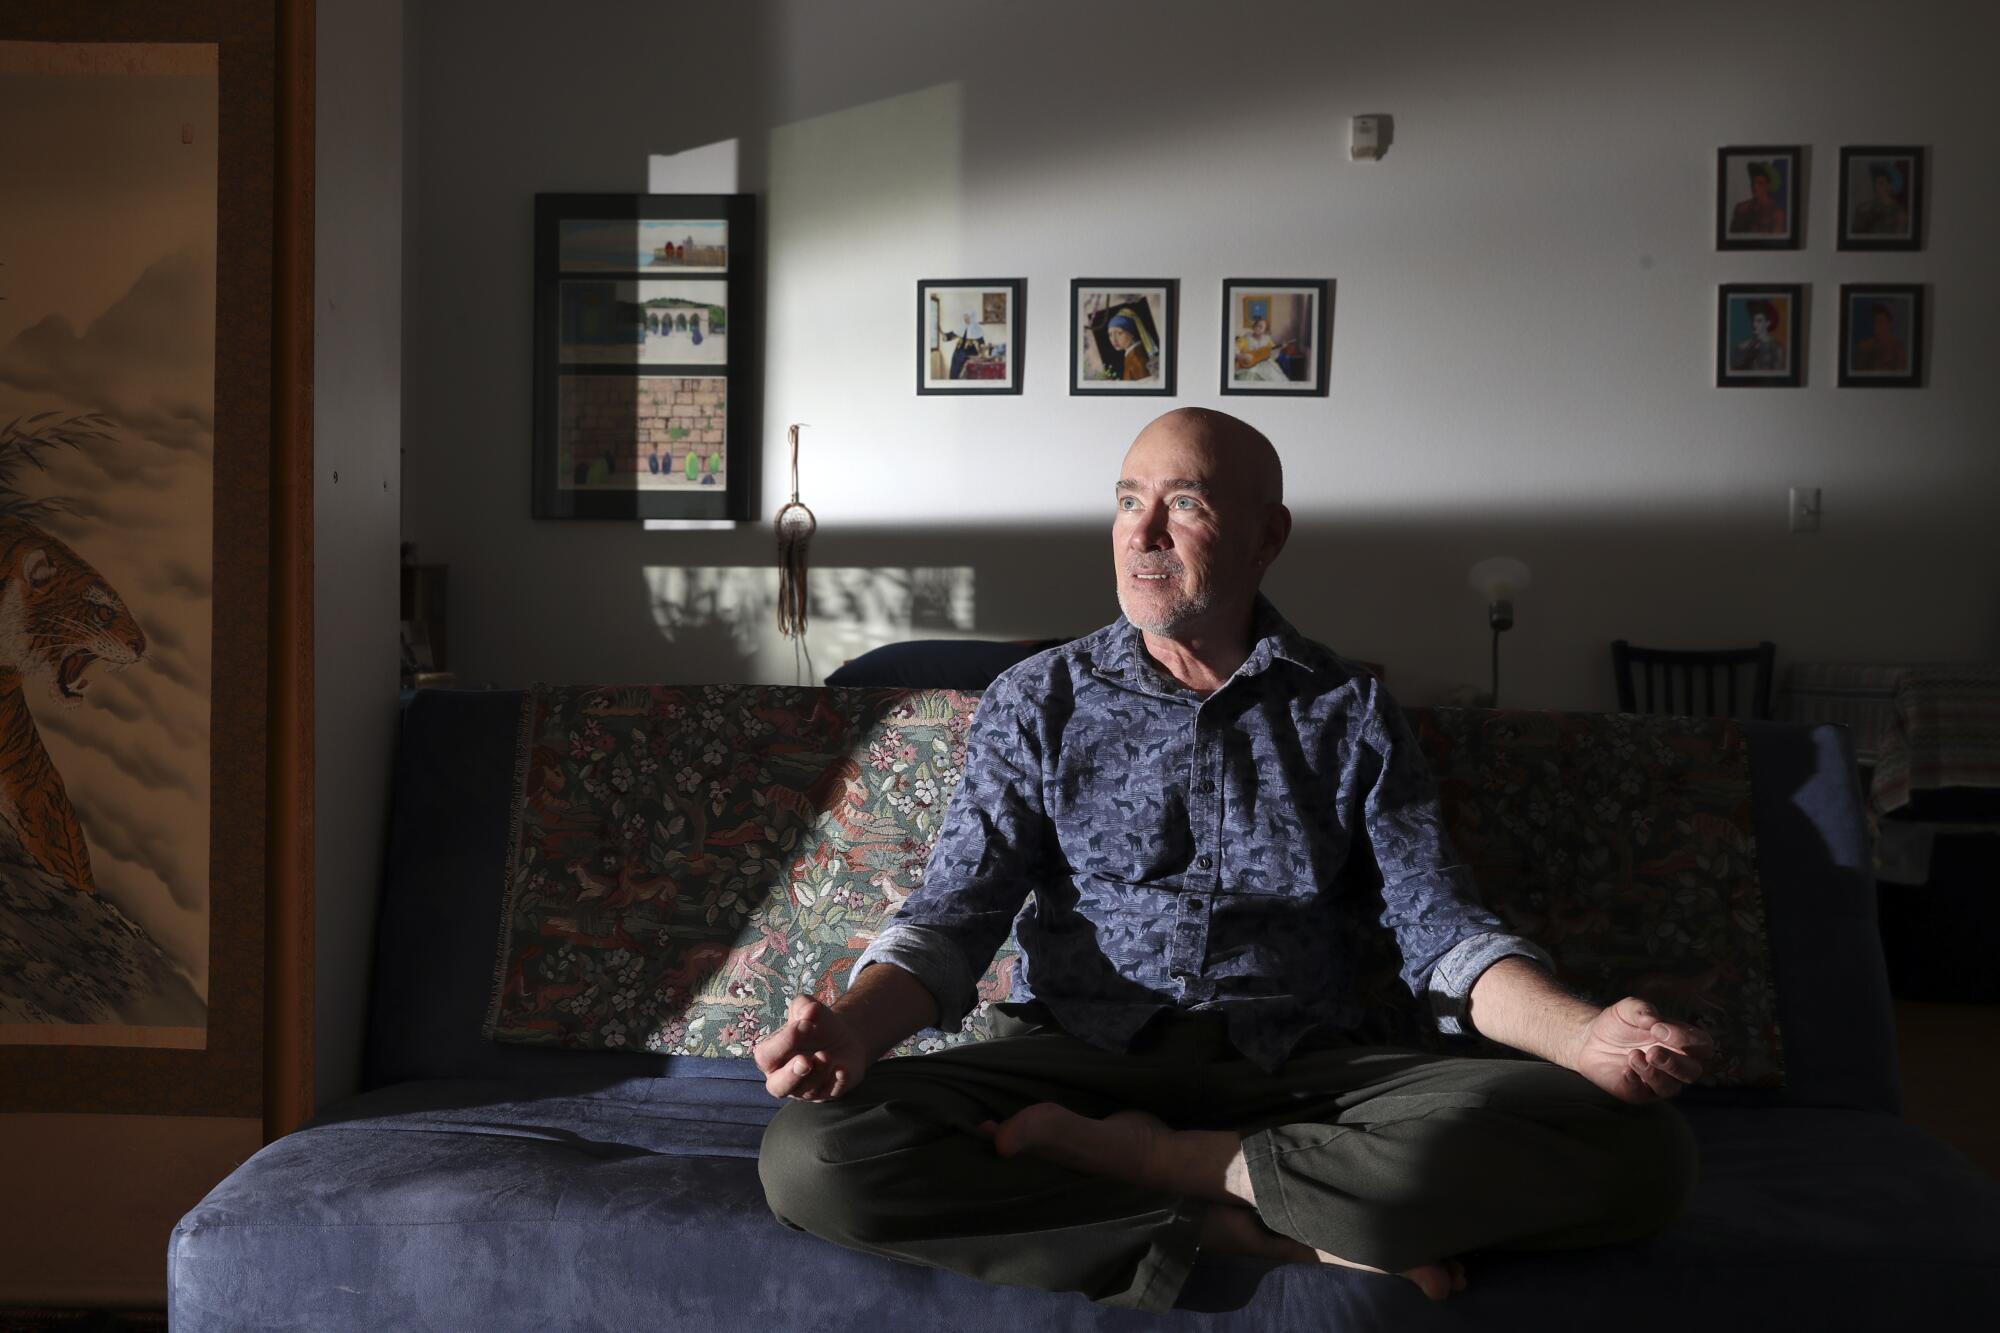  Terrance Whitten sits in a meditation pose on a sofa.